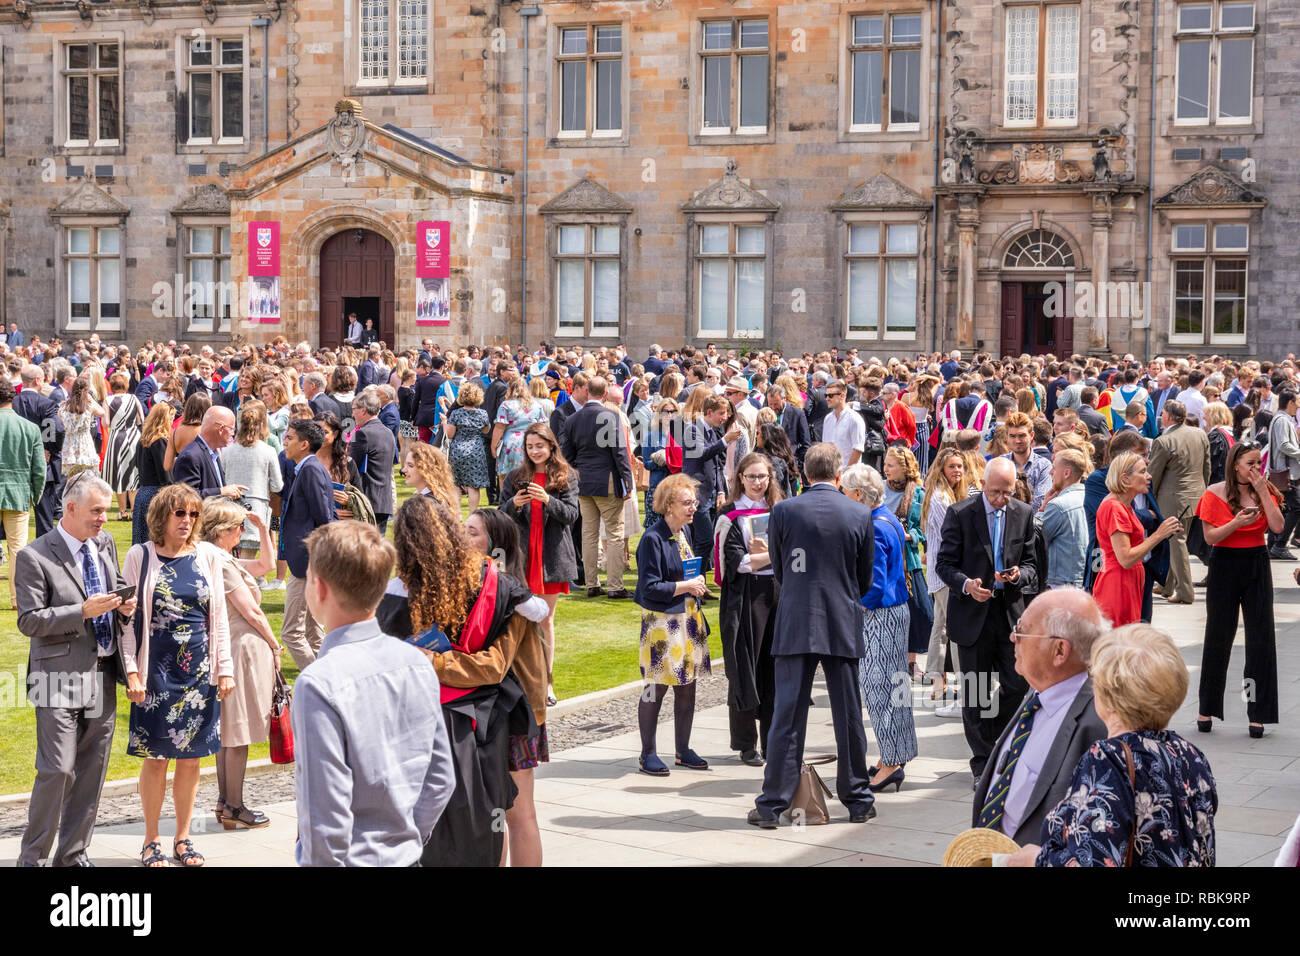 Students, friends and families celebrating Graduation Day in June 2018 in St Salvators Quad, St Andrews University, Fife, Scotland UK Stock Photo